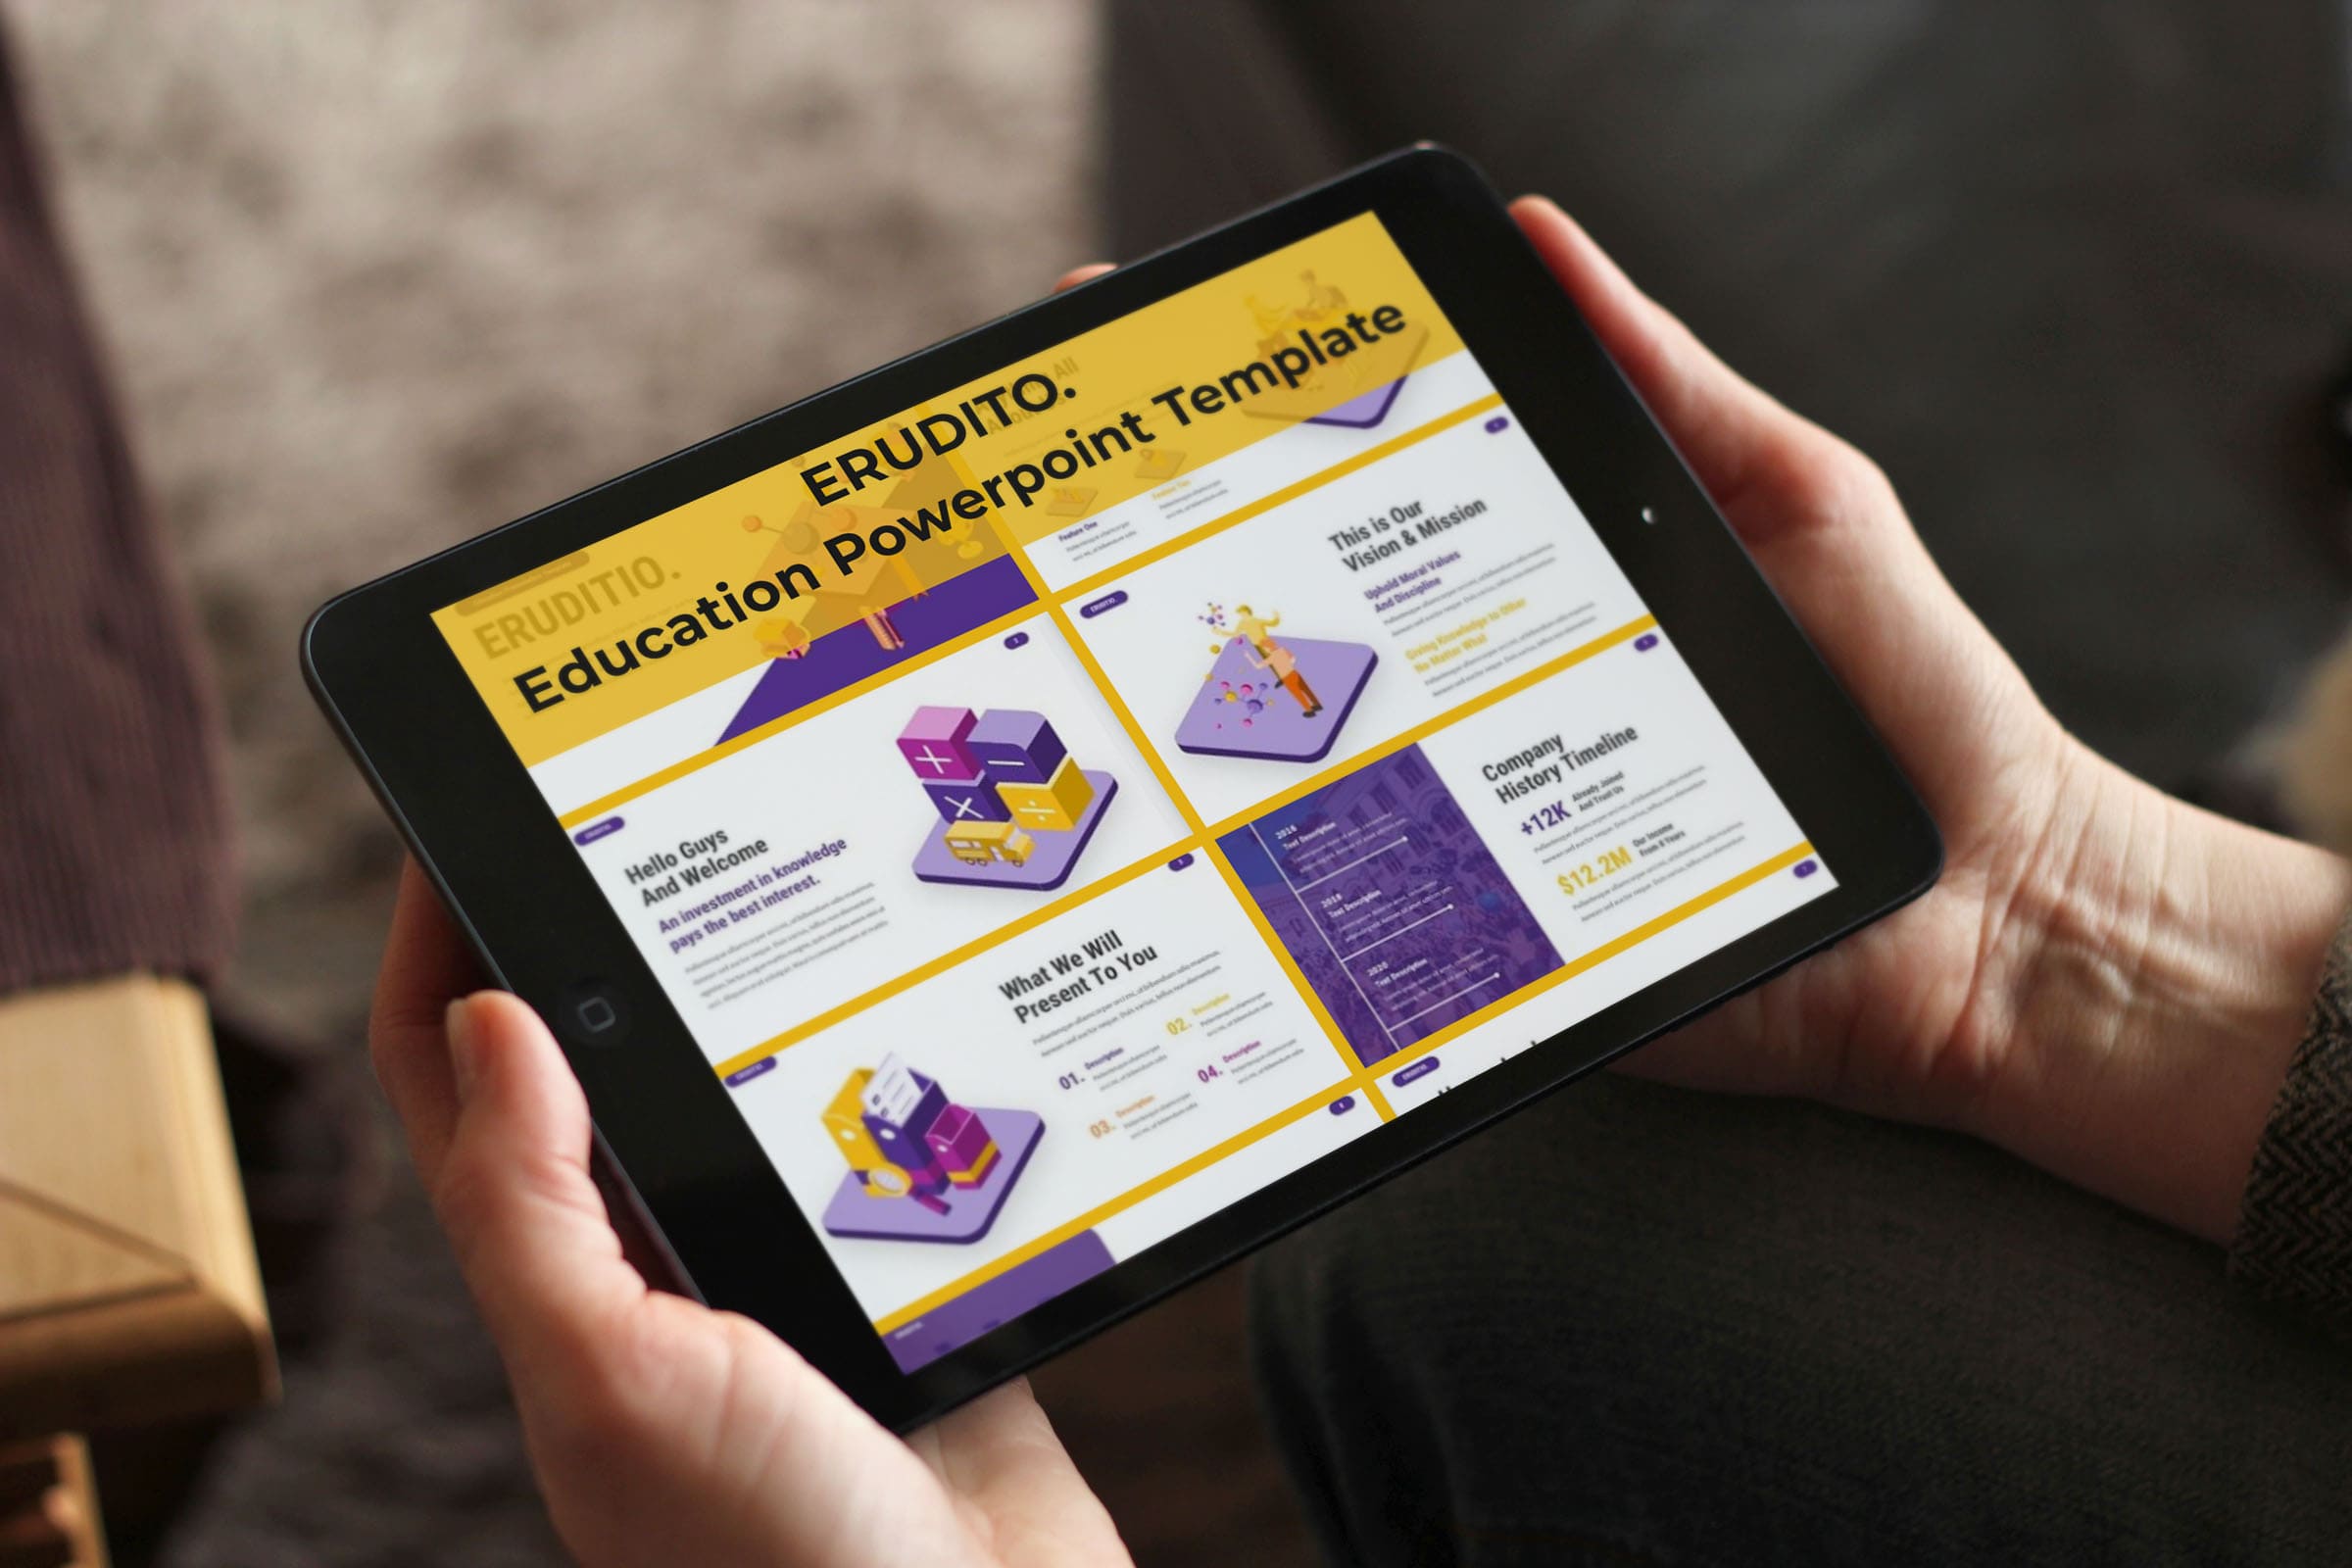 Tablet option of Eruditio - Education Powerpoint Template.